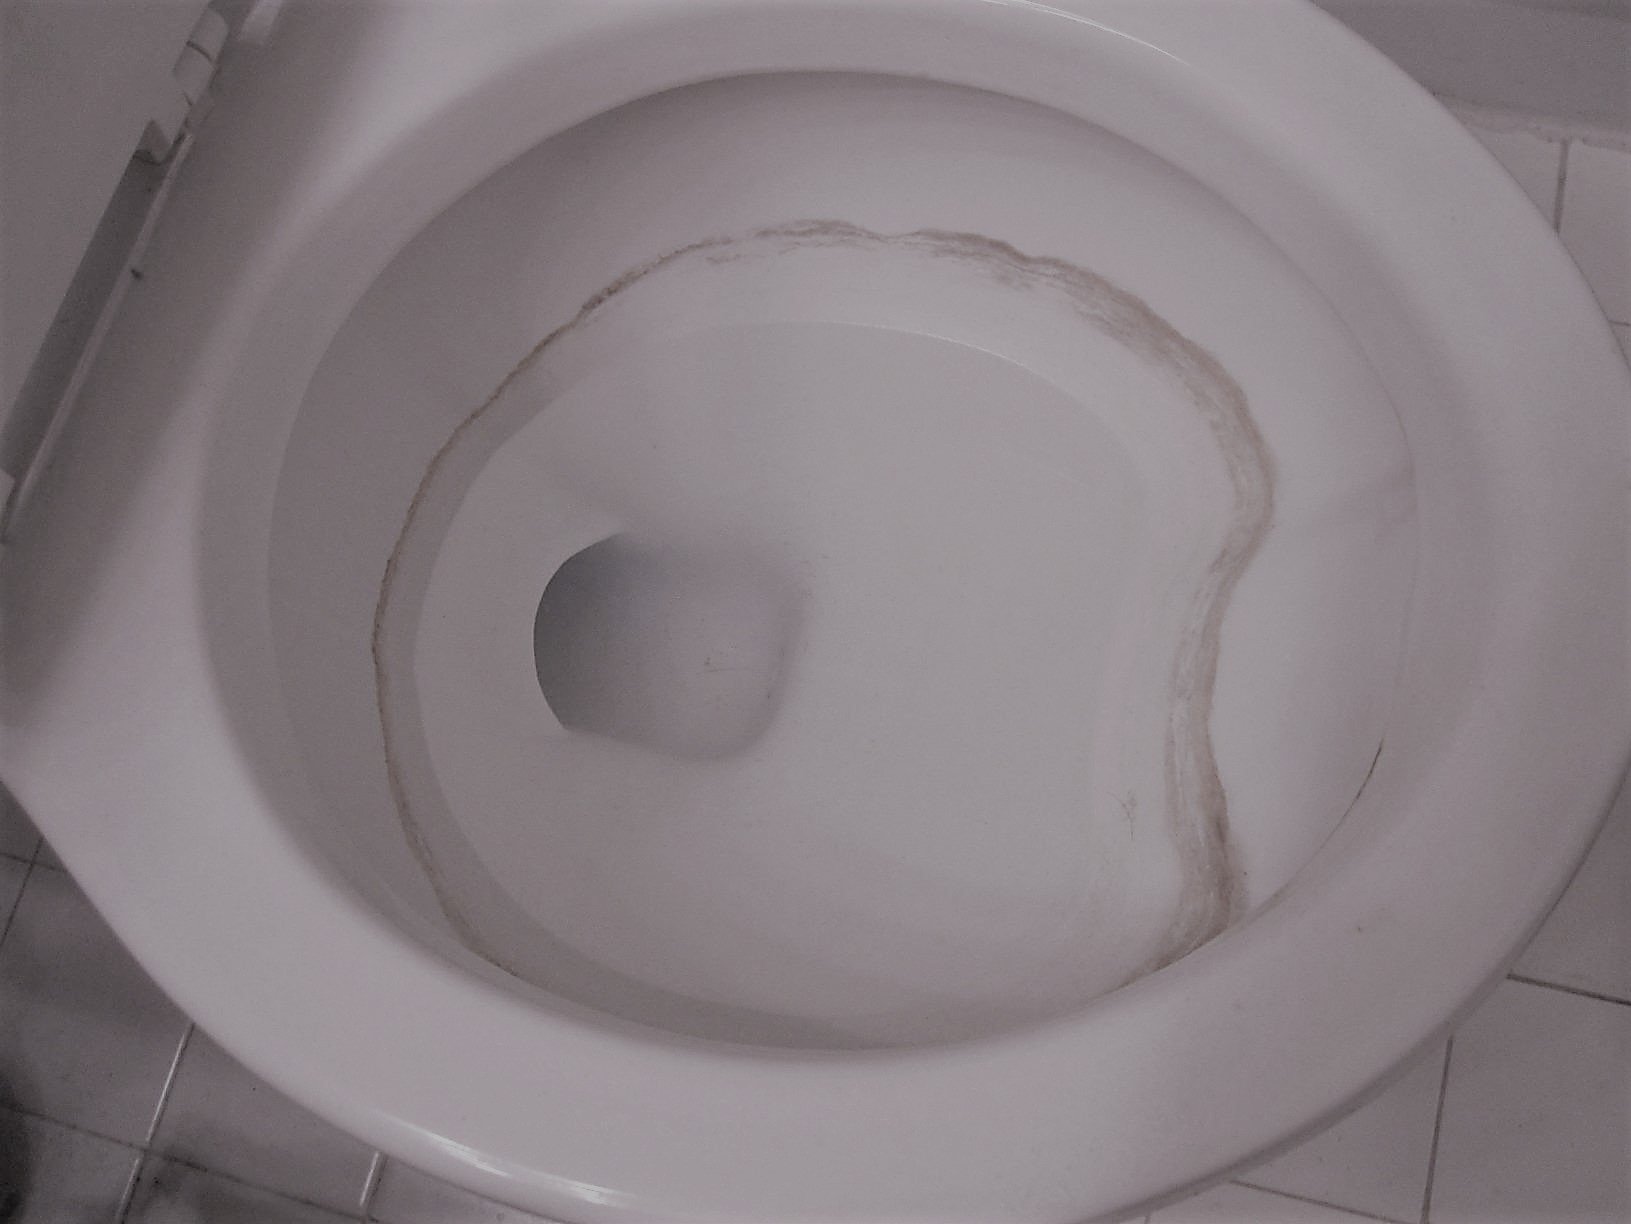 What Causes Grey Stains In Toilet Bowl